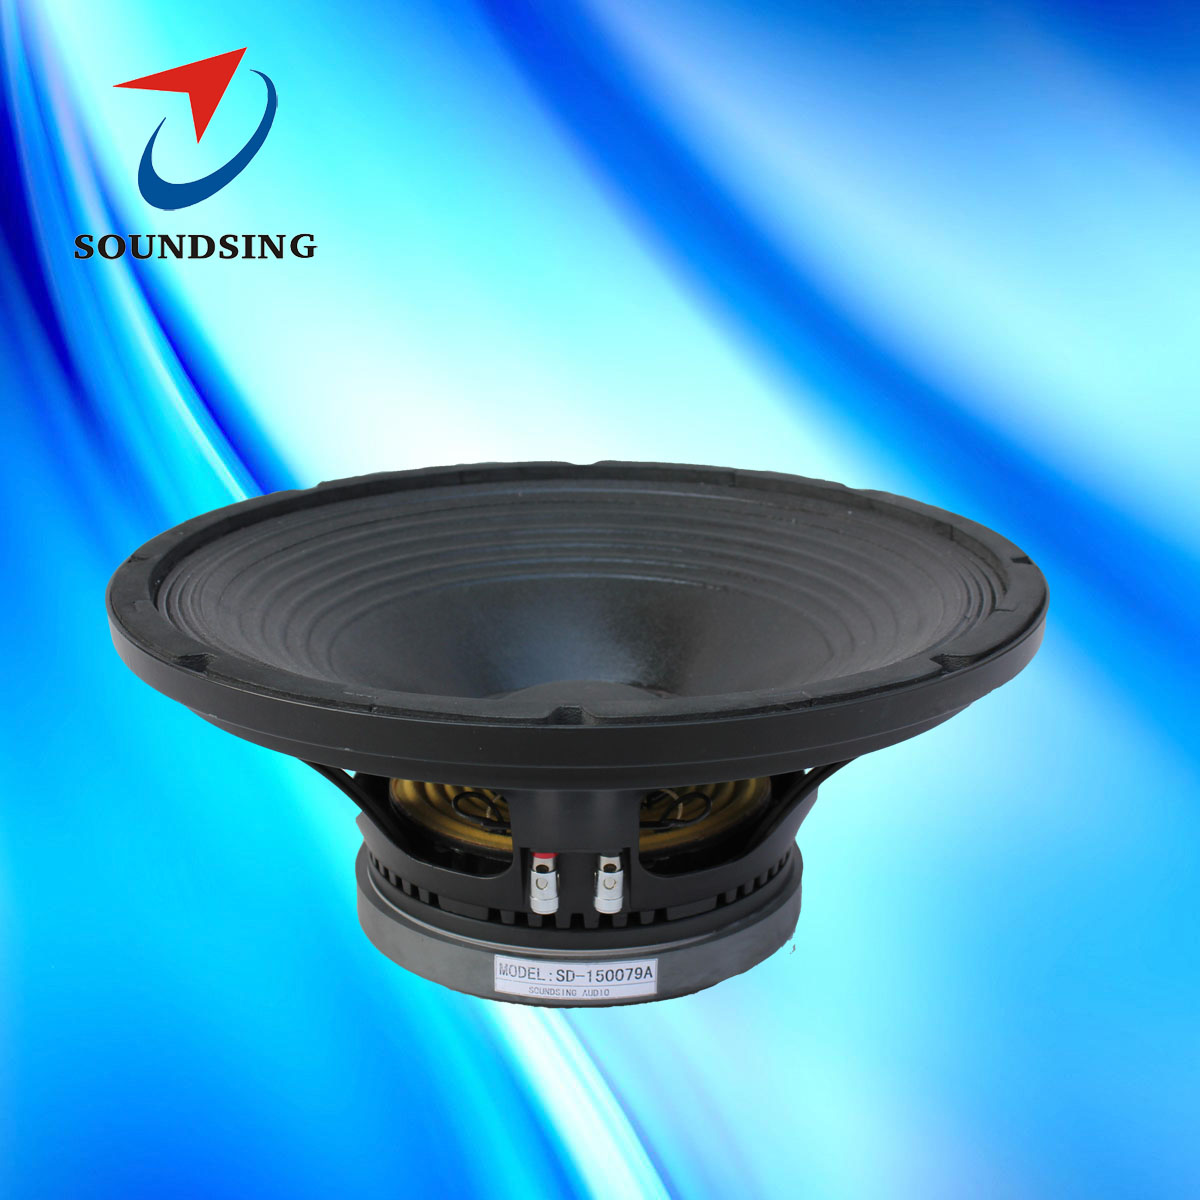 SD-150079A 15inch mid bass audio speakers